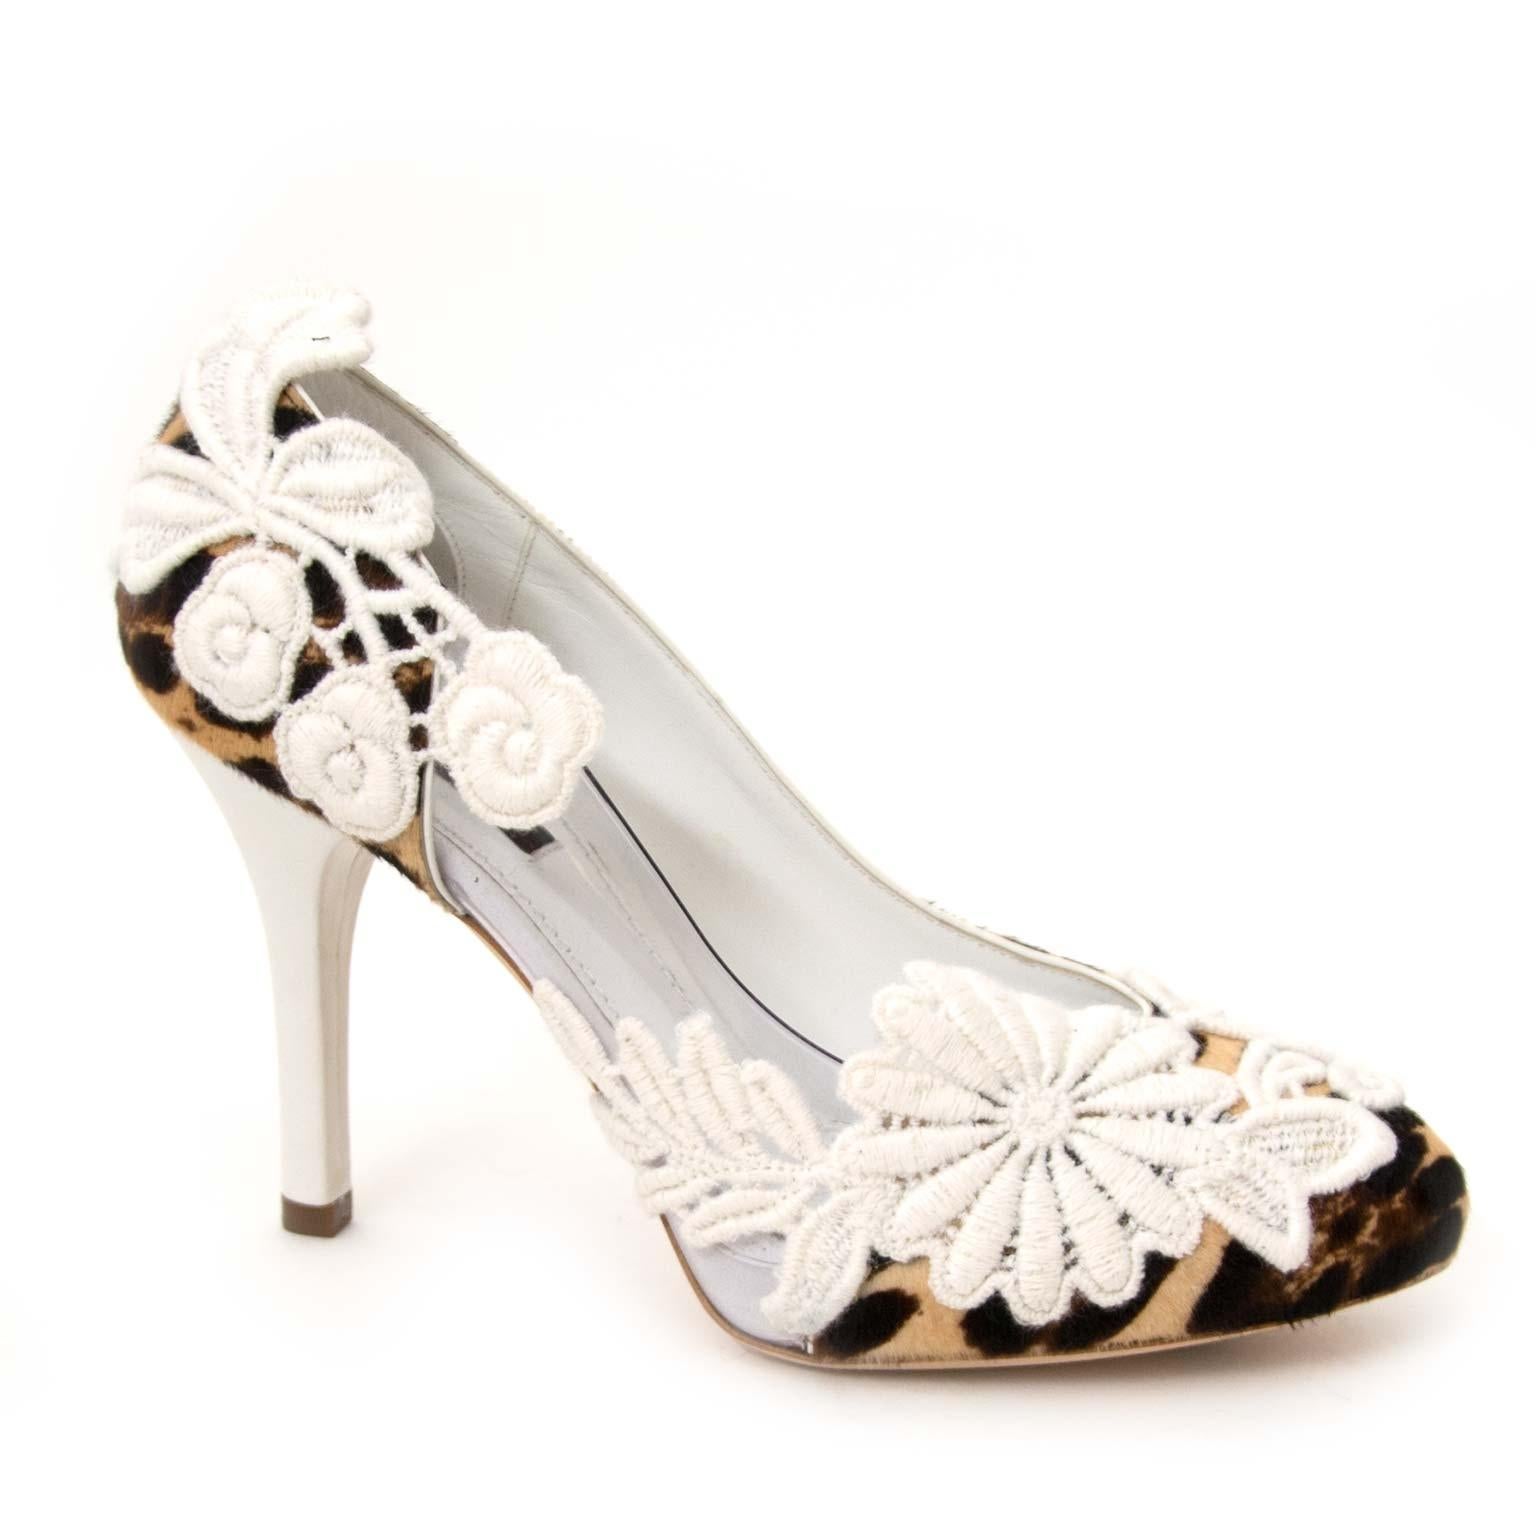 As new

Dolce & Gabbana Leopard And Flower Lace Pumps

Be different with these Dolce & Gabbana pumps. The seethrough fabric with leopard and flower lace make this shoe unique from beginning to end. 